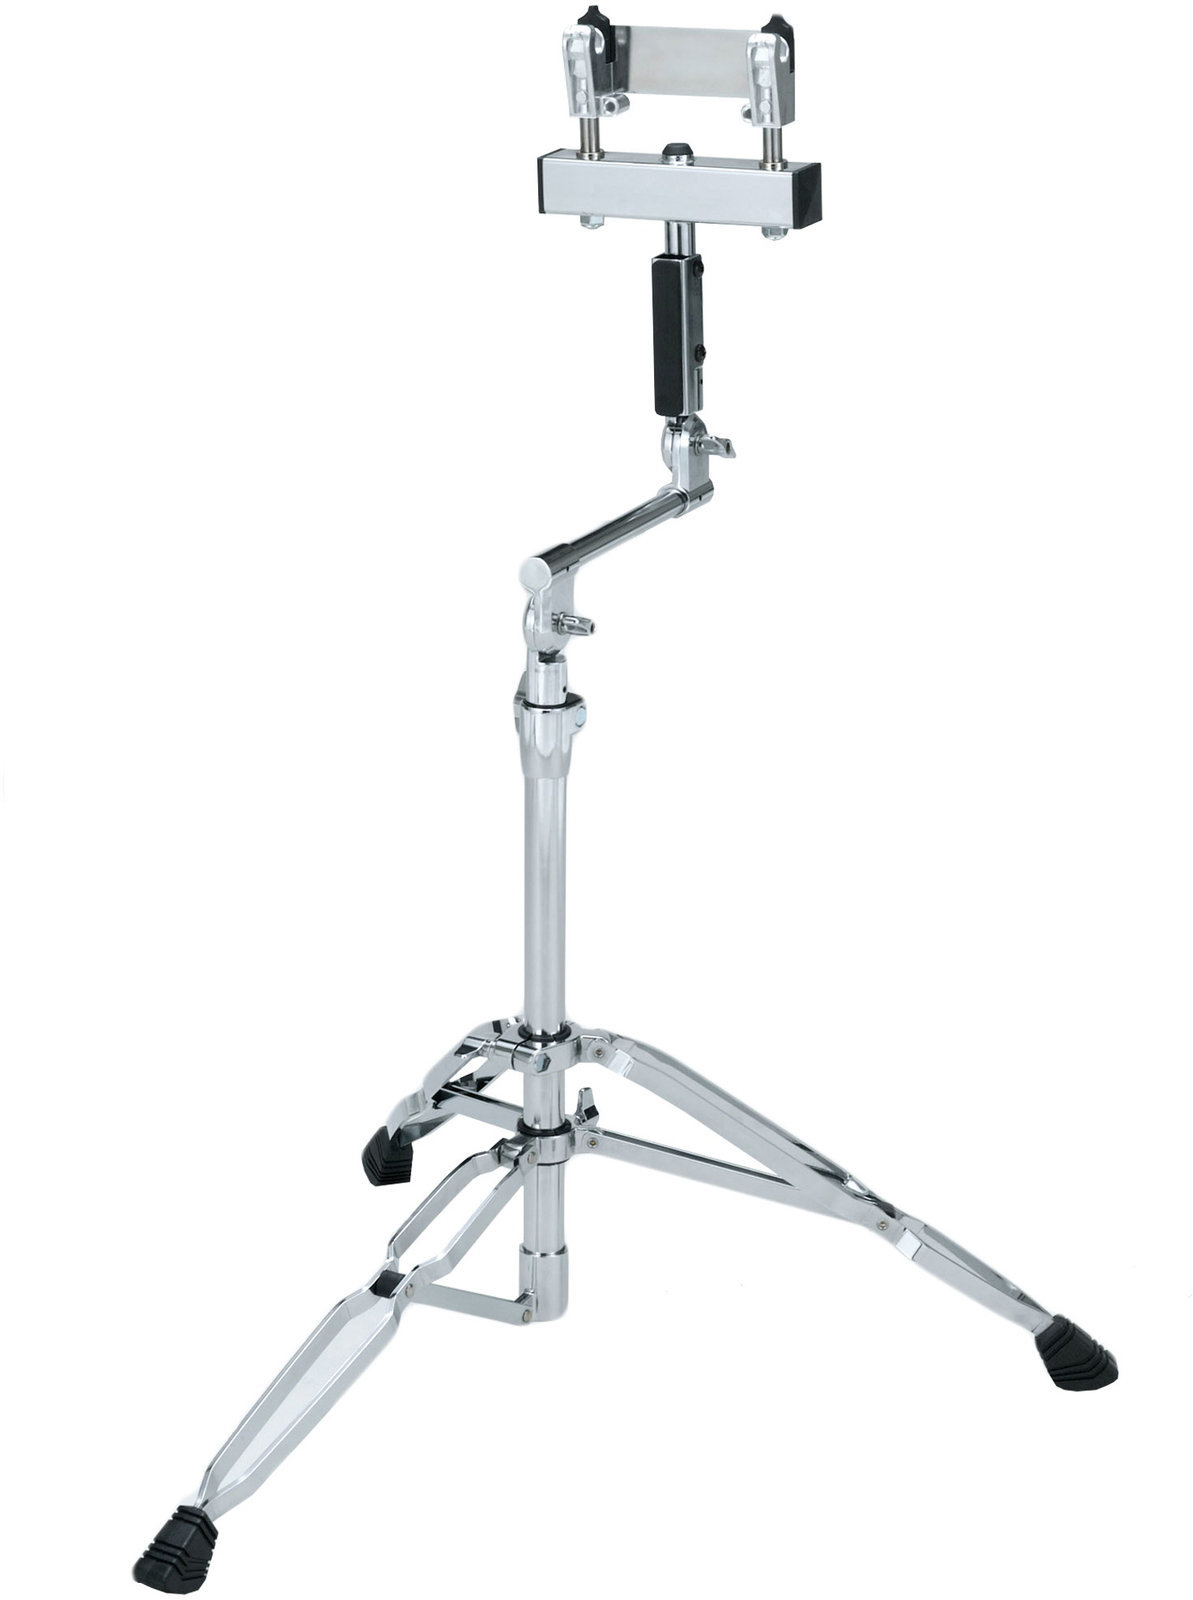 Tama HMSD79WN Marching Snare Drum Stand